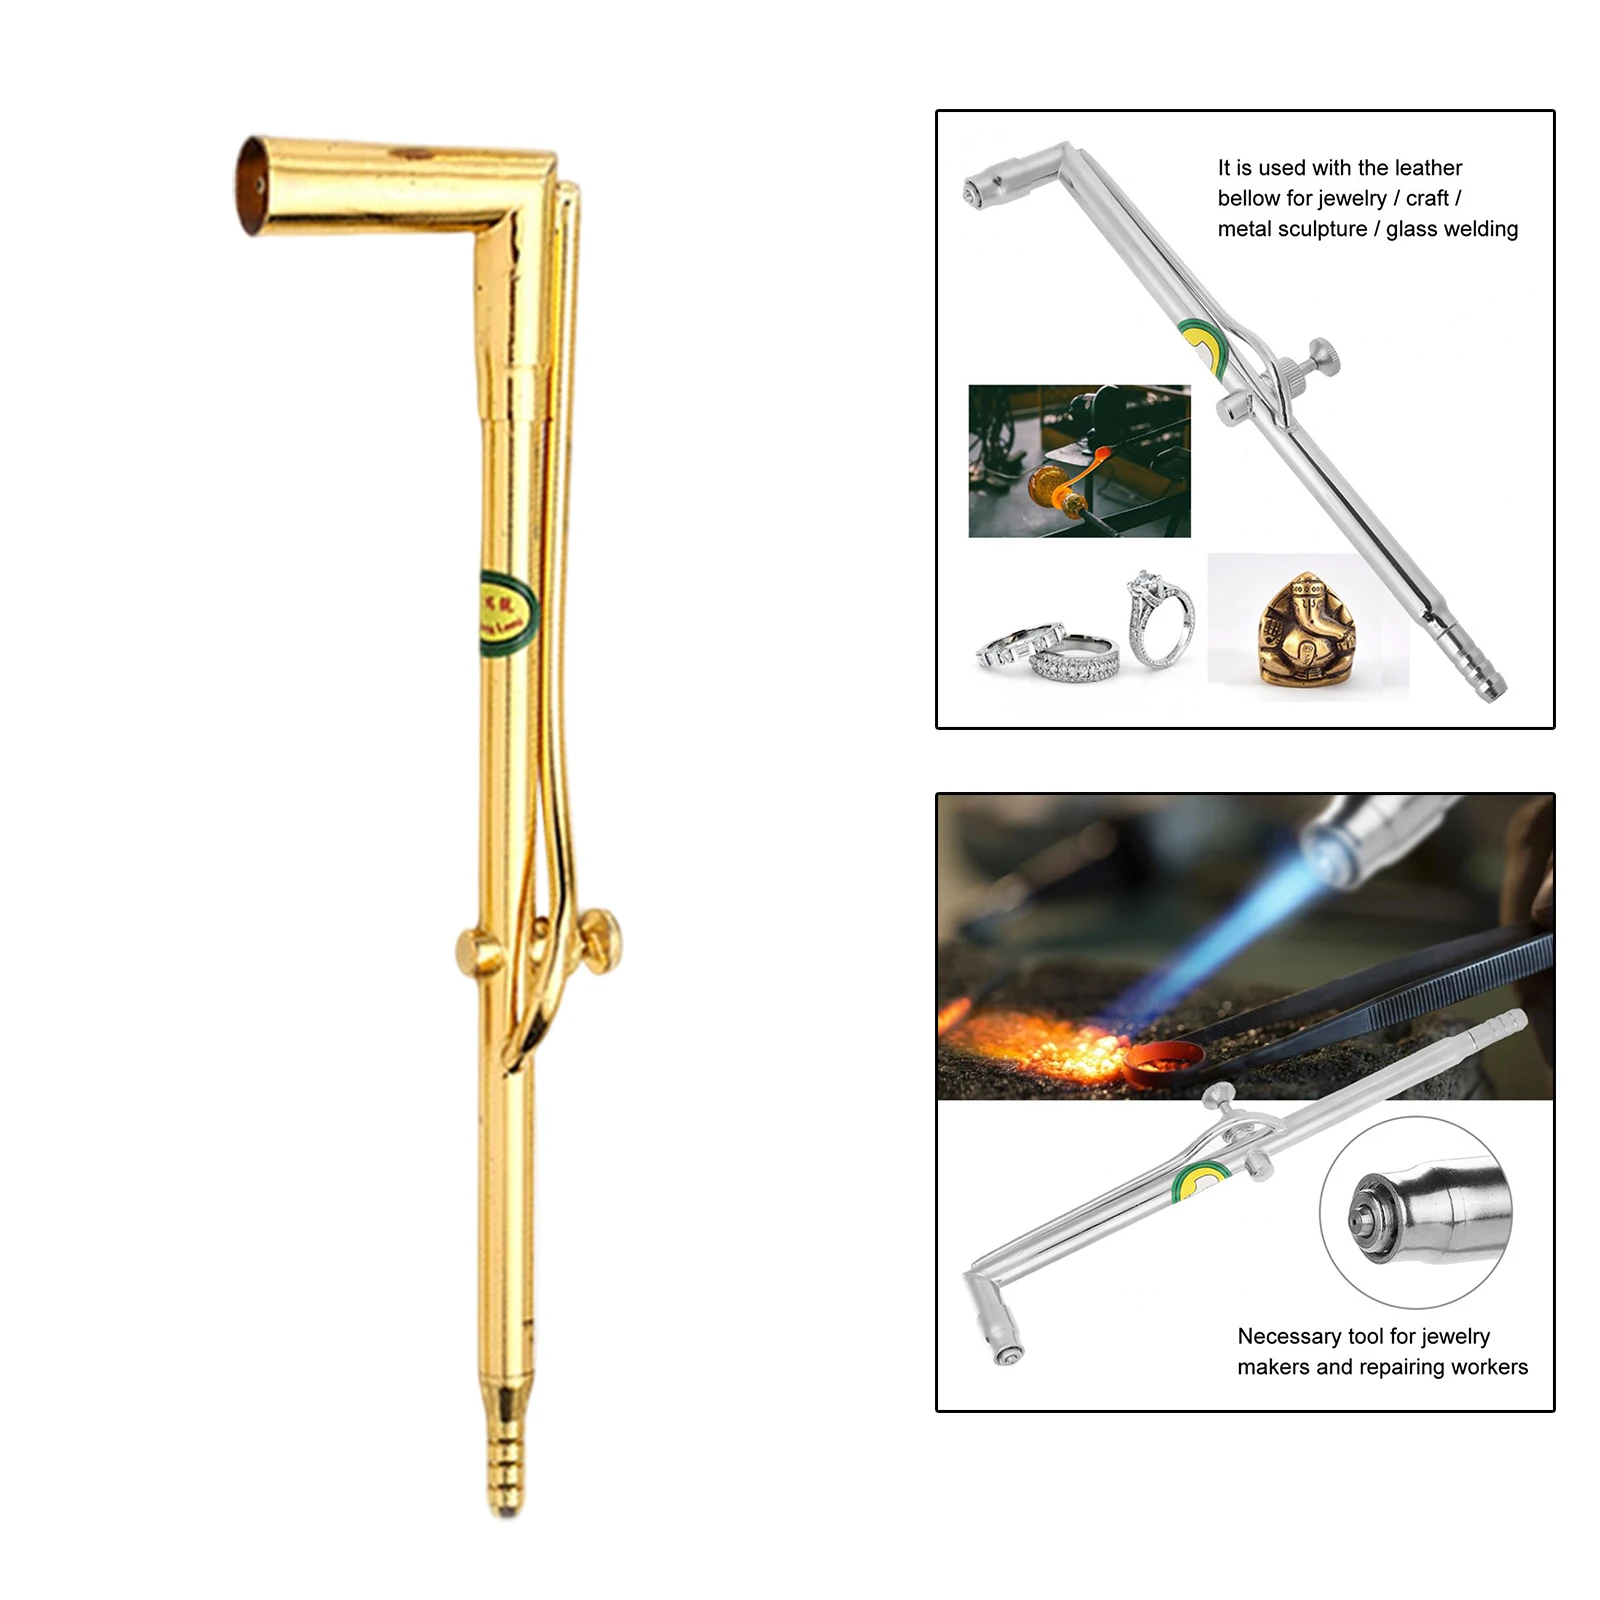 Gasoline Jewelry  Manual  Making Copper Gas Heater Oxyhydrogen Micro Torch Kit Regulators for Repairing  Home